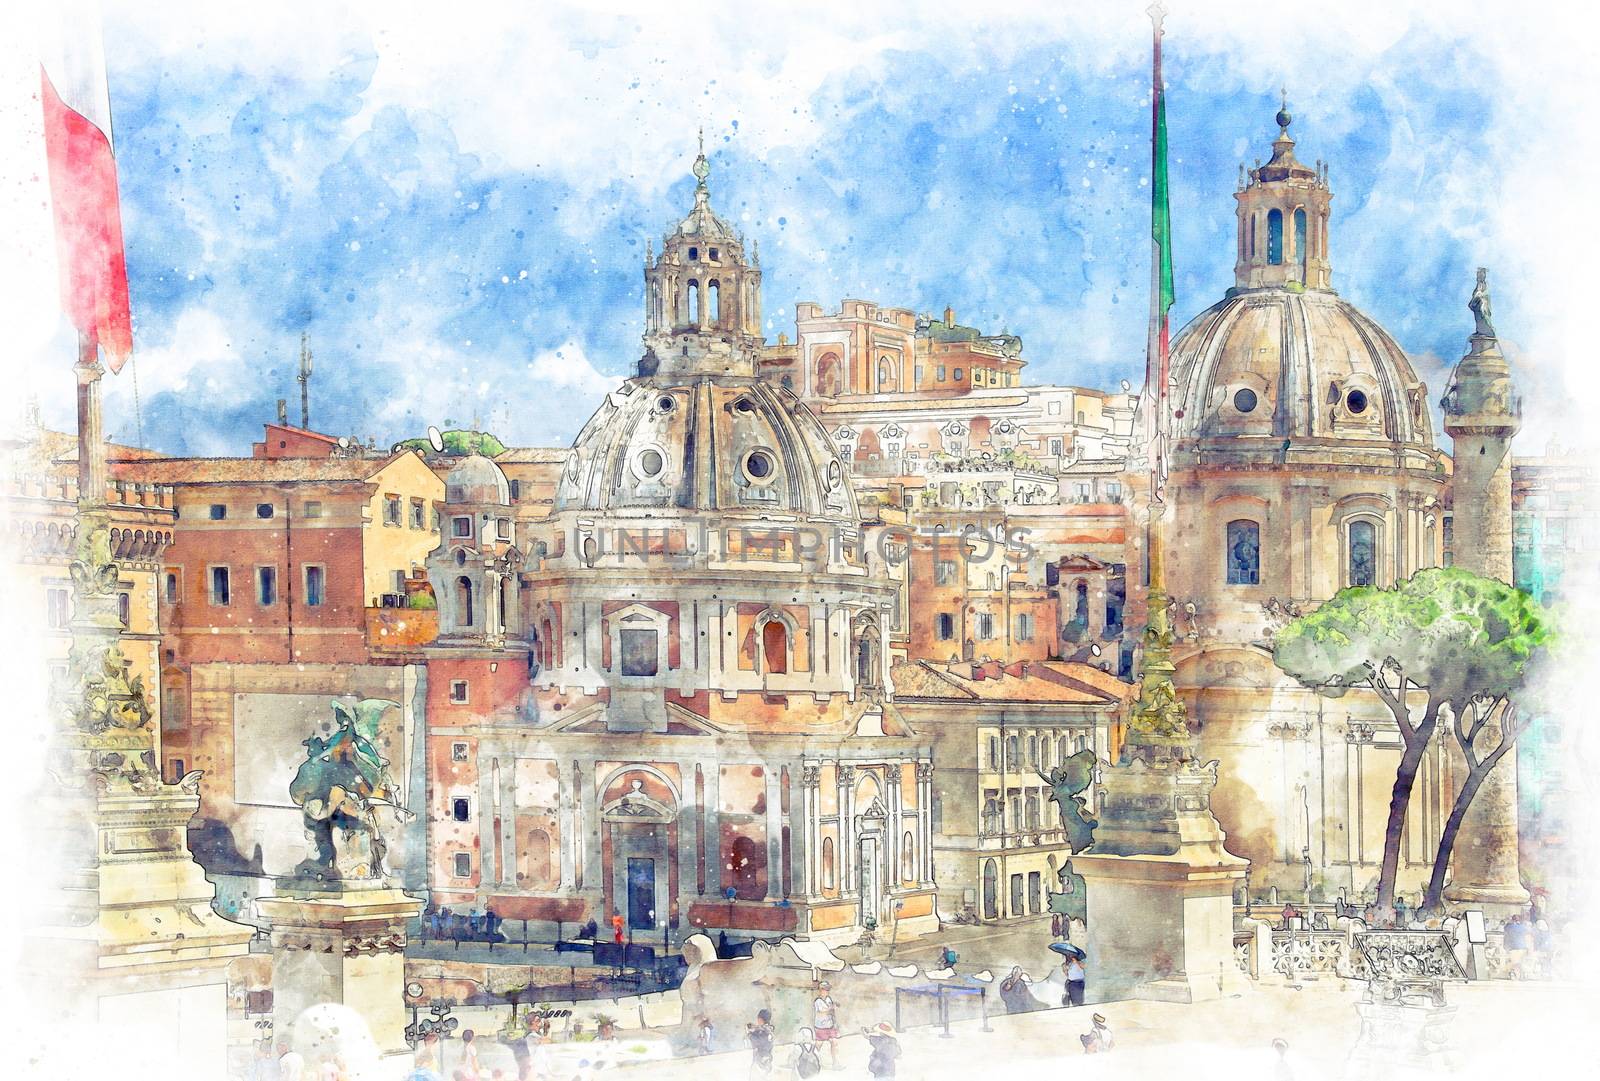 Digital illustration in watercolor style of Trajan's Column and Santa Maria di Loreto, view from Altar of the Fatherland, Rome, Italy